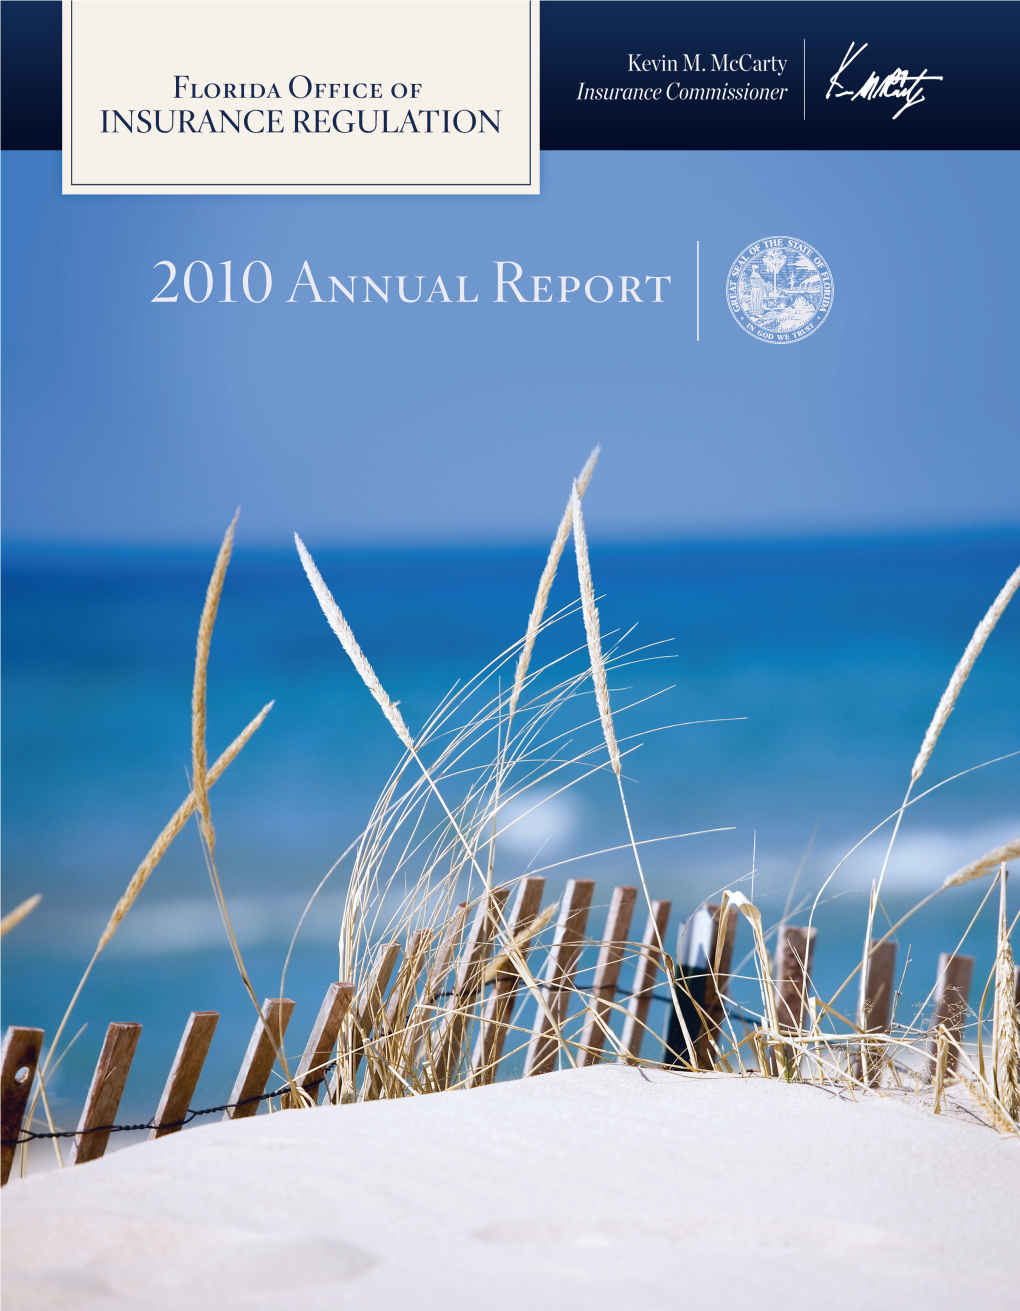 2010 Annual Report of the Florida Office of Insurance Regulation for the 2009 Calendar Year, in Compliance with Section 624.315, Florida Statutes